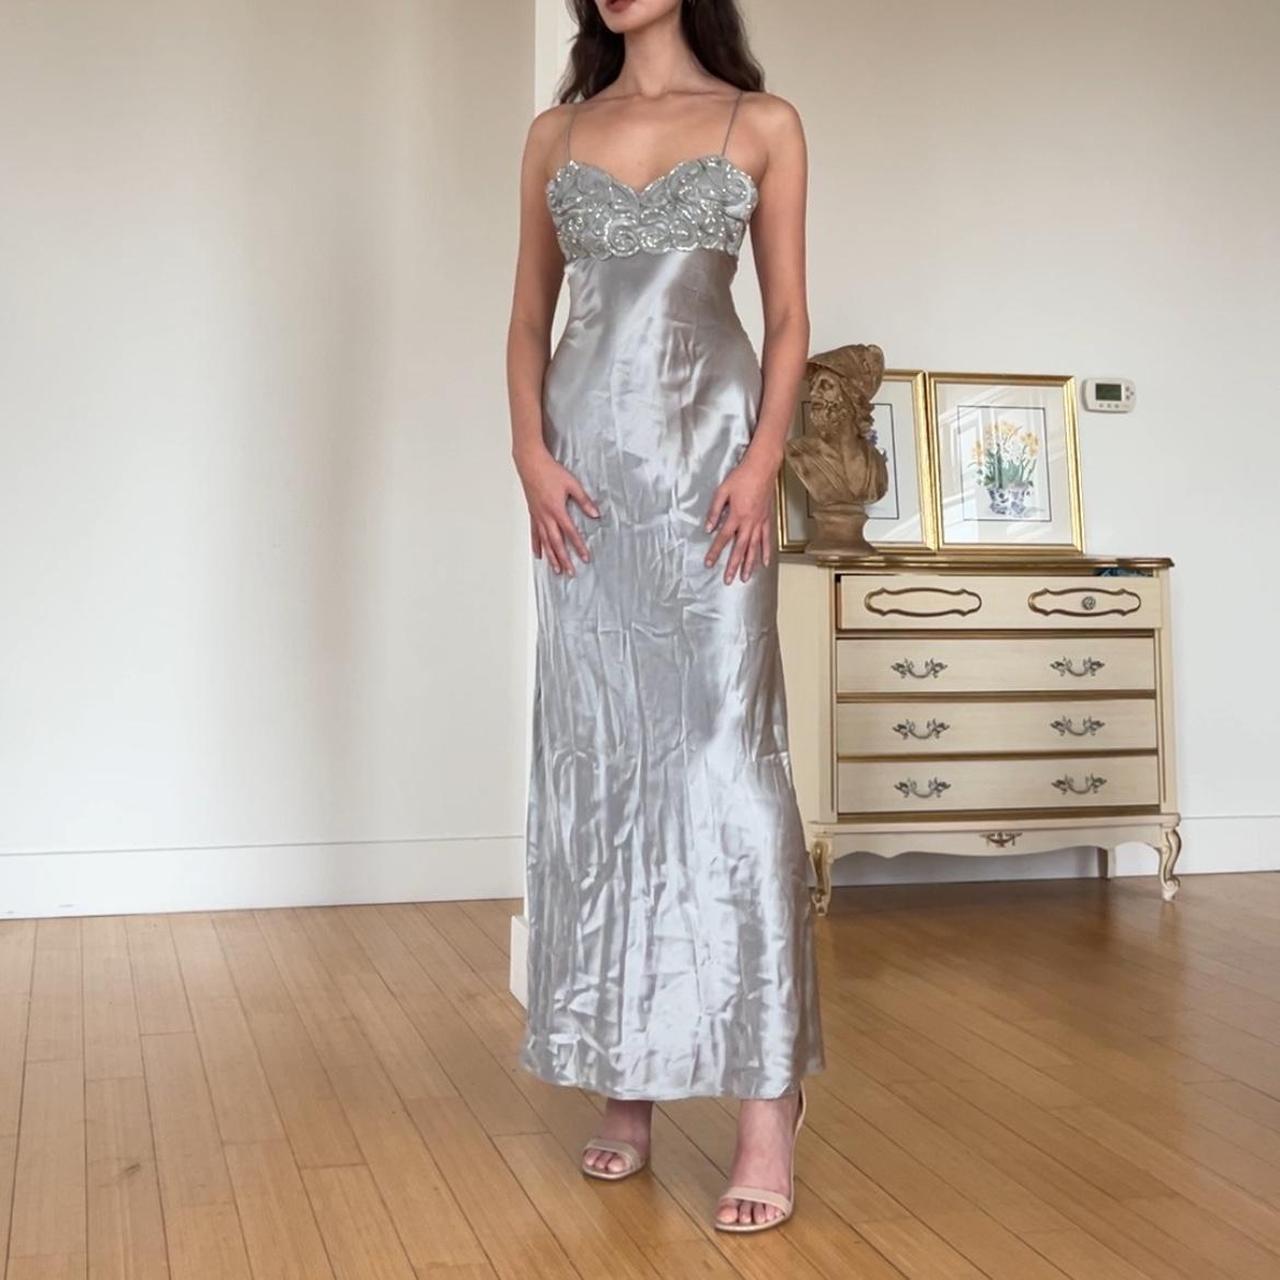 Ethereal vintage 90s silver satin gown 🪞 will make... - Depop